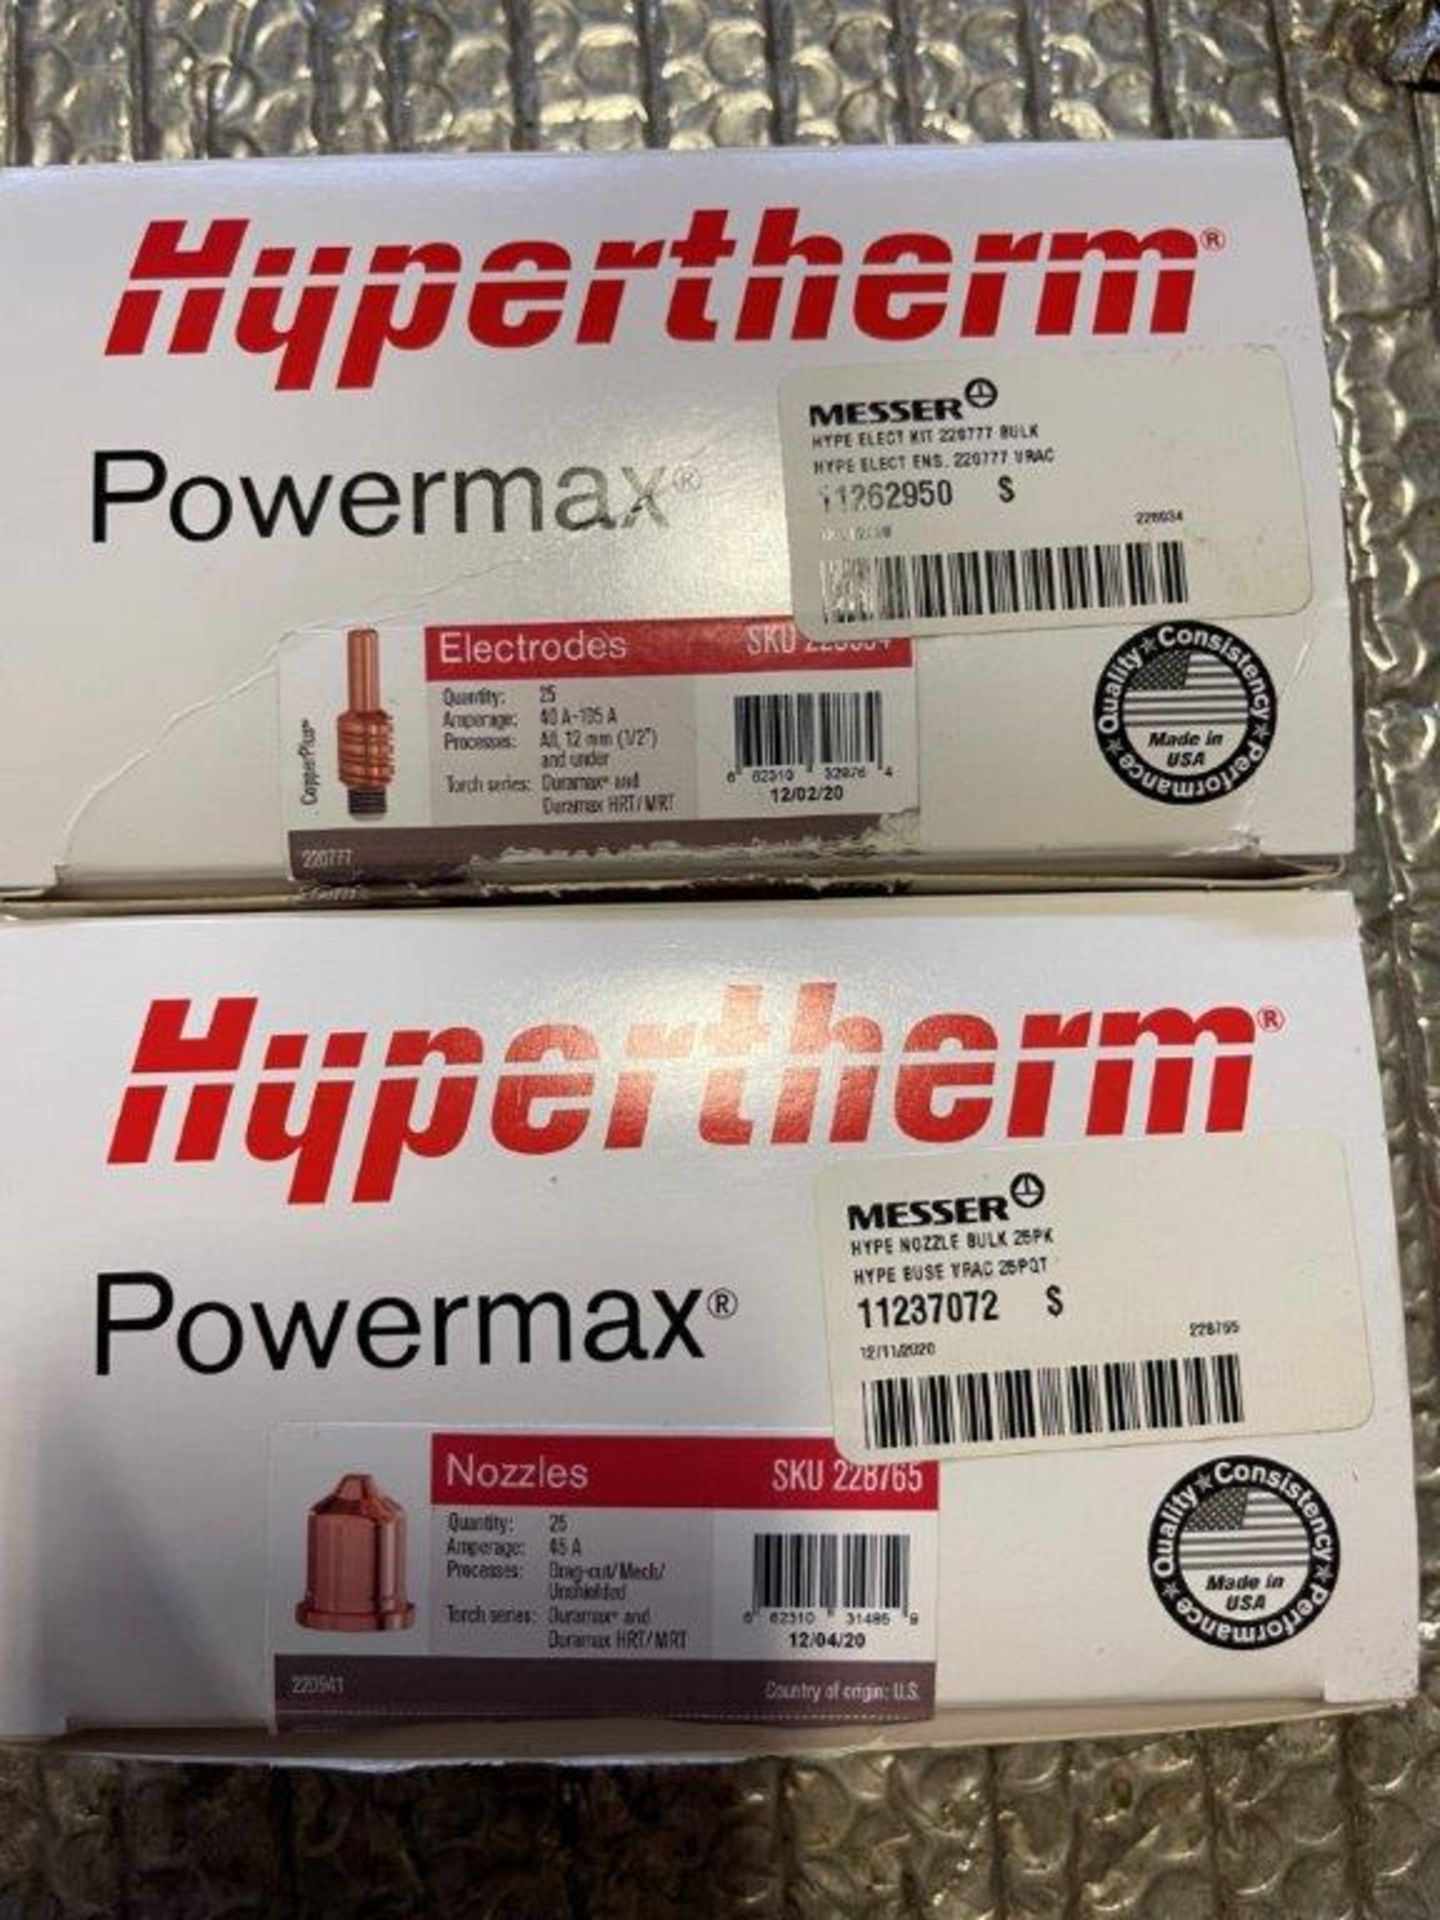 LOT/ HYPERTHERM POWERMAX NOZZLES, ELECTRODES AND PLASMA CUTTING ACCESSORIES - Image 2 of 4